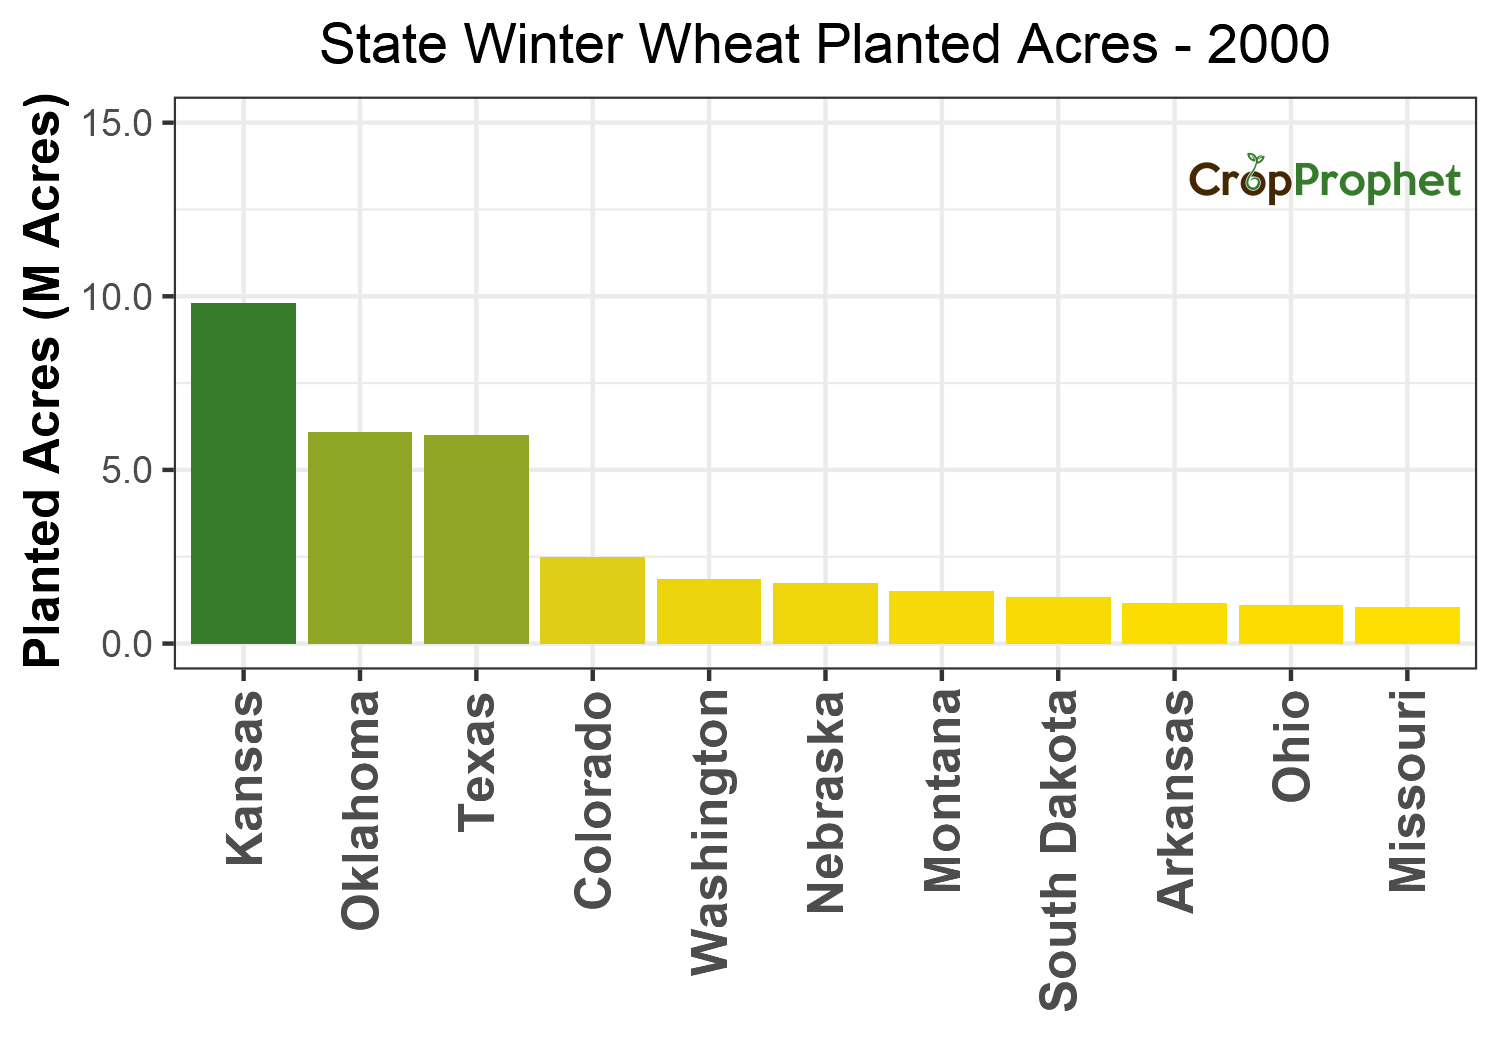 Winter wheat Production by State - 2000 Rankings